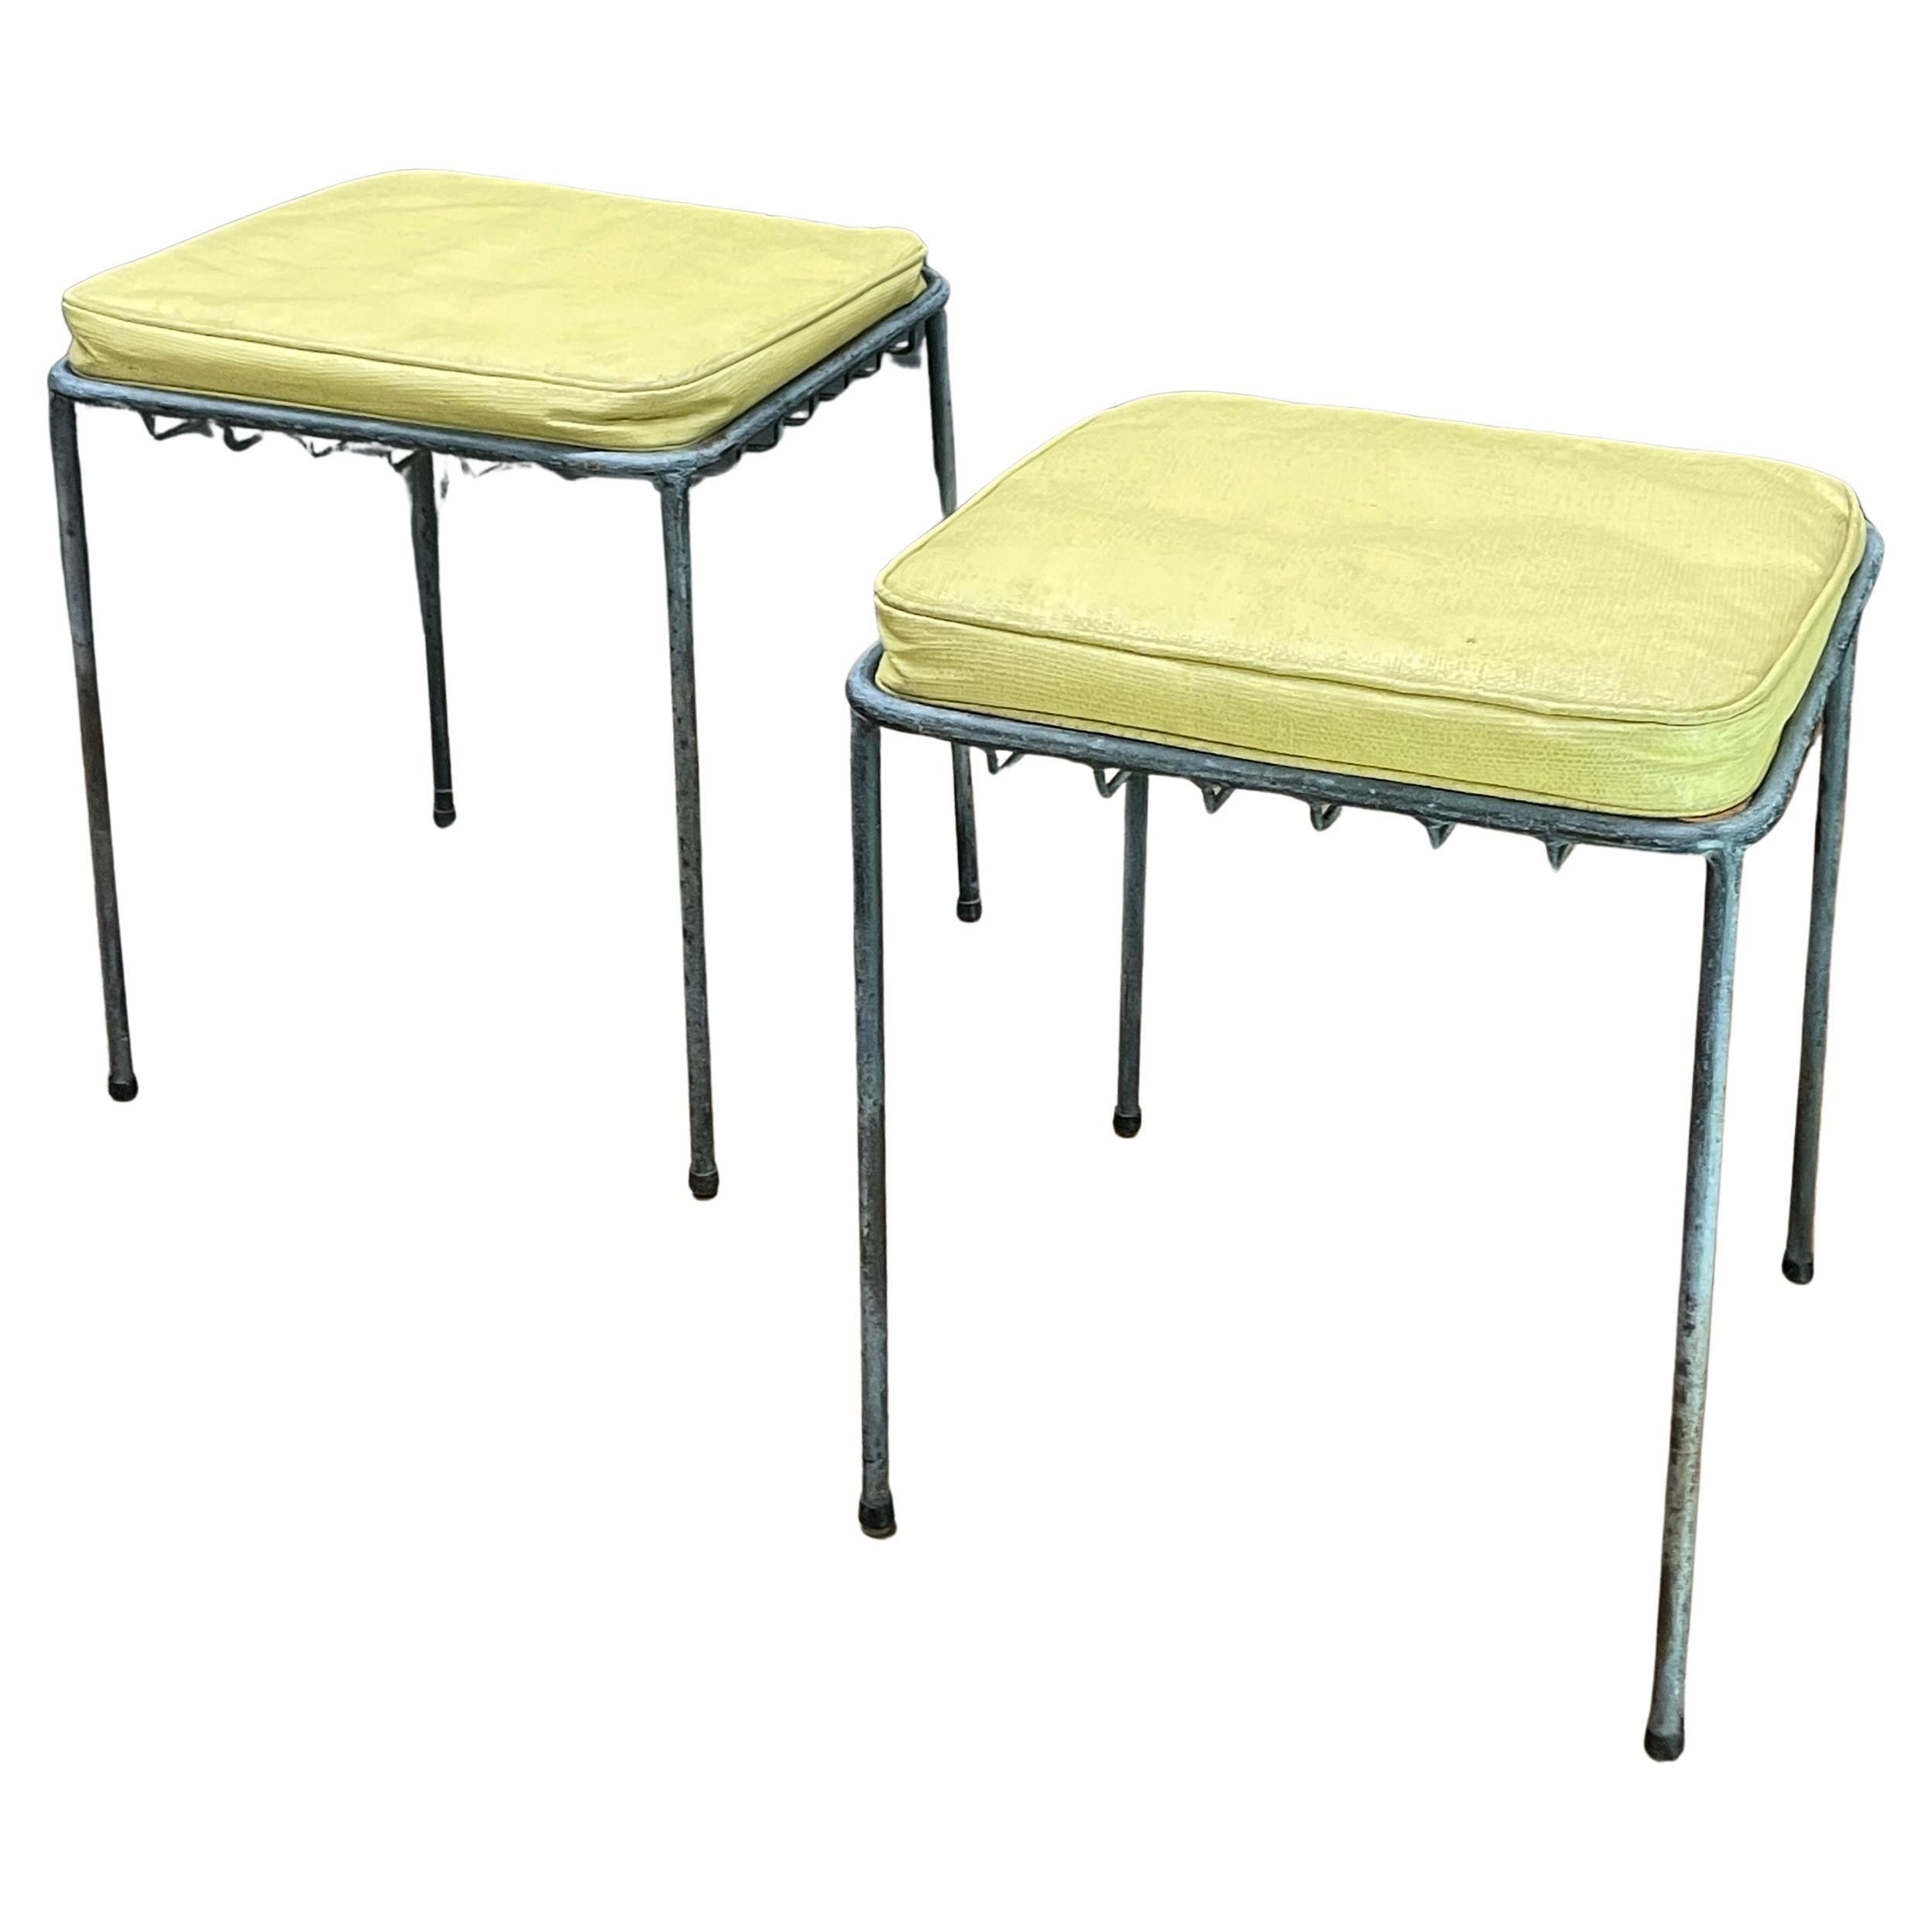 Rare 1950s California Modern George Nelson Arbuck Outdoor Iron Stools / Tables  For Sale